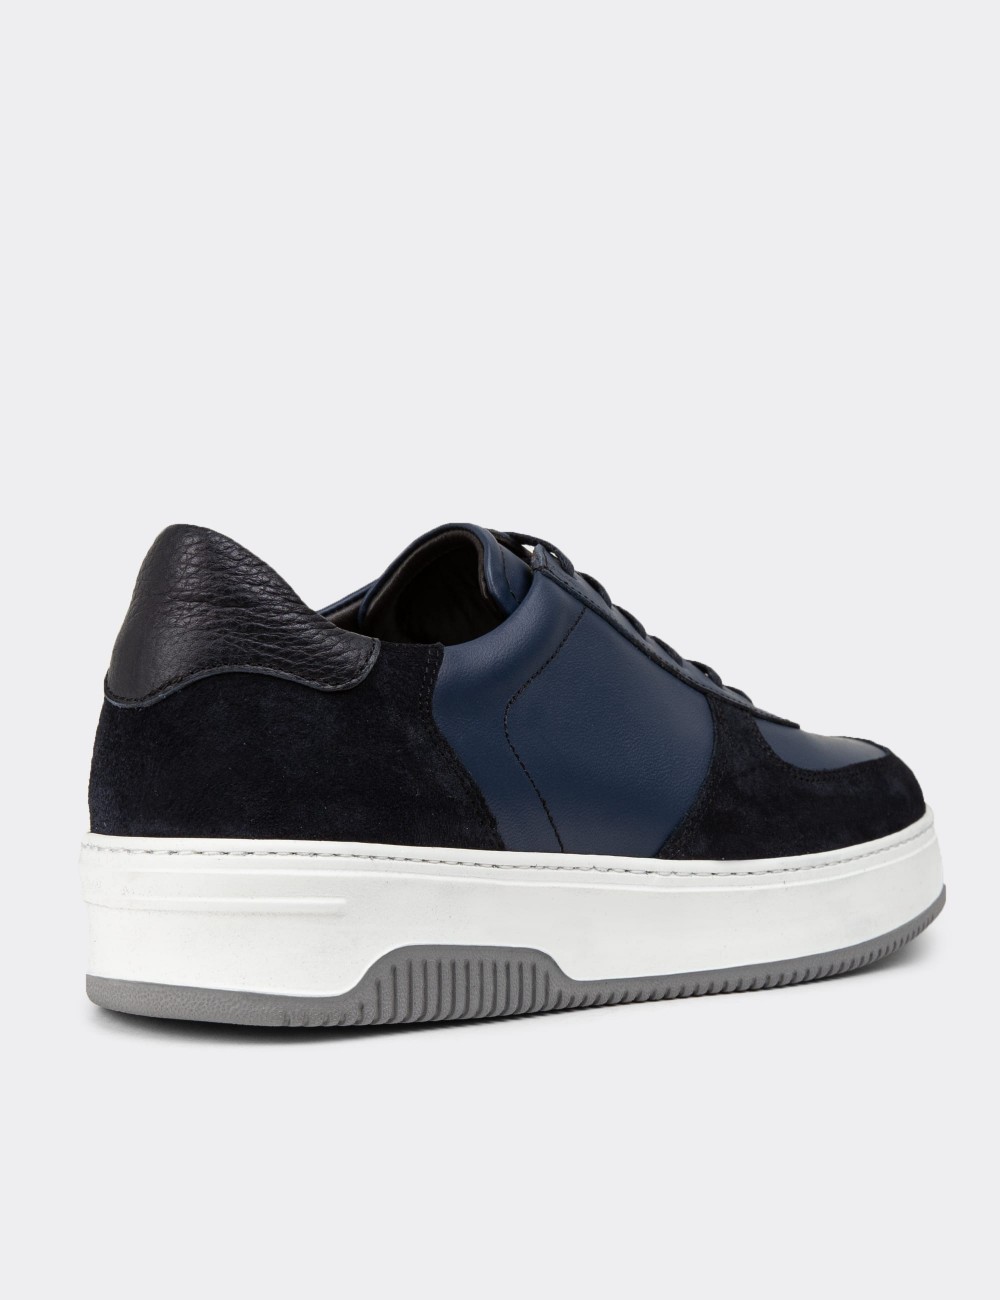 Blue Suede Leather Sneakers - 01965MMVIE02